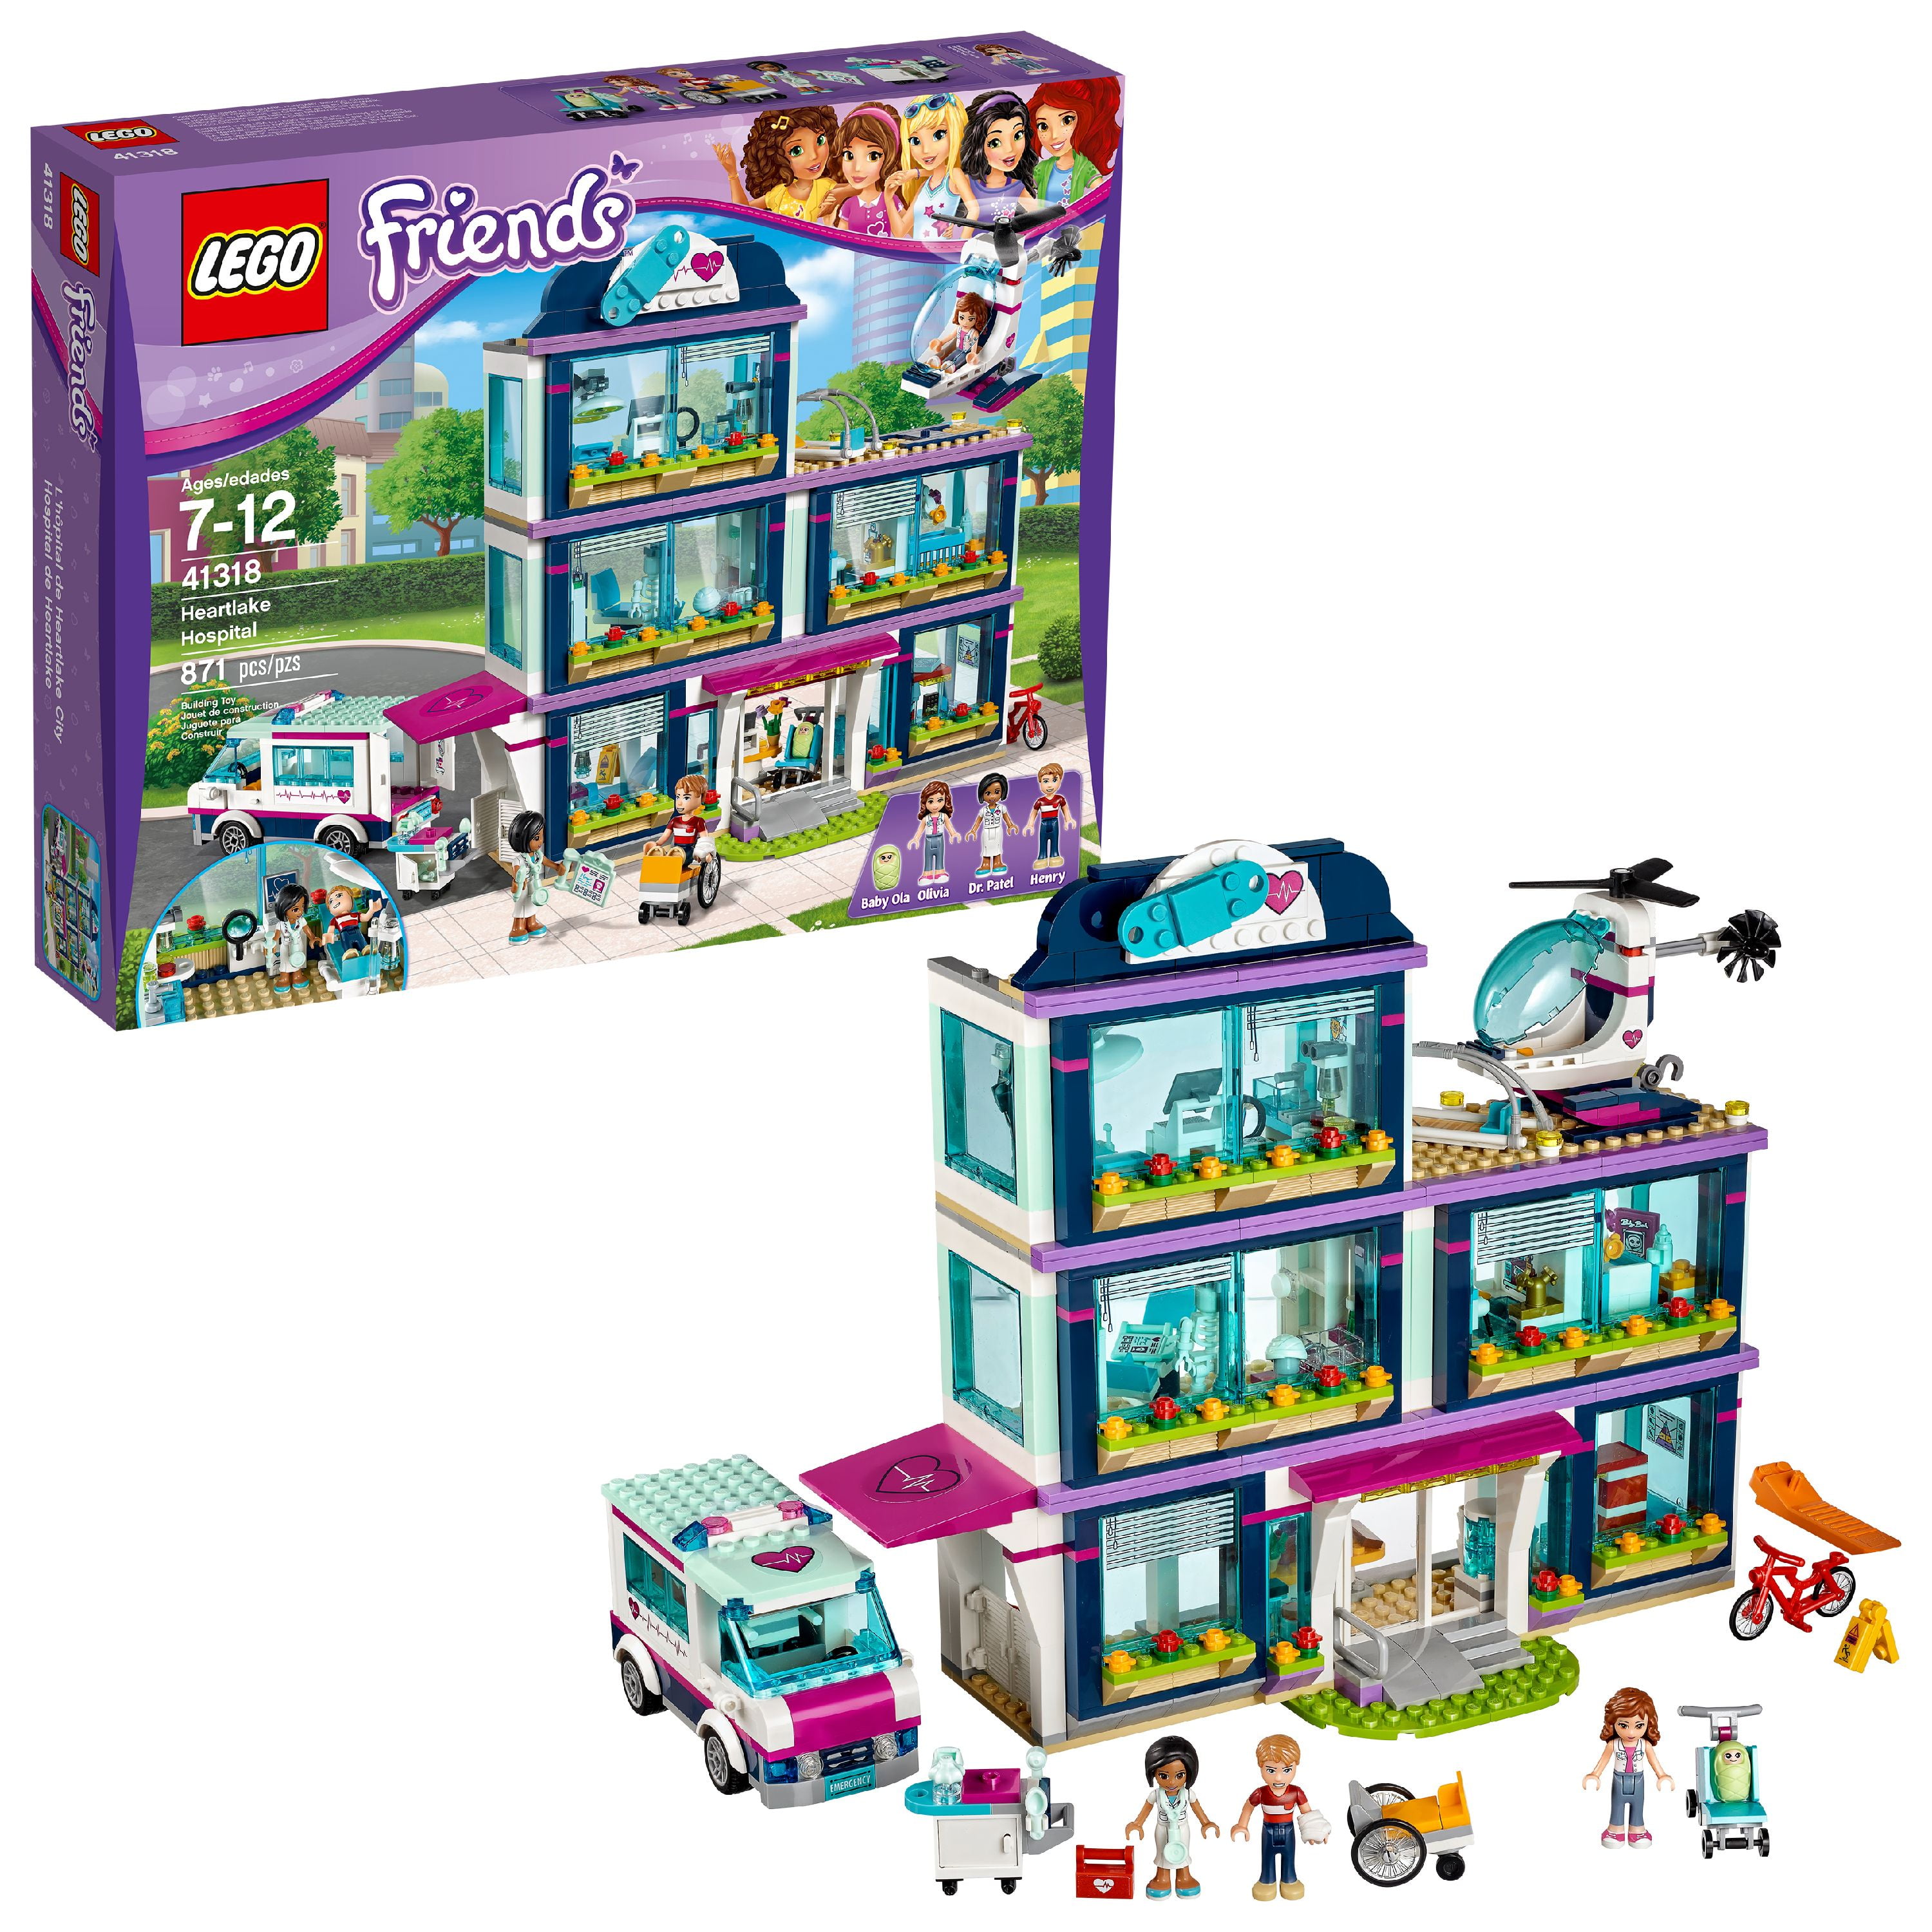 Details about   NEW 2019 Friends City Heartlake Hospital New 41318 Brand Building Block Set Gift 